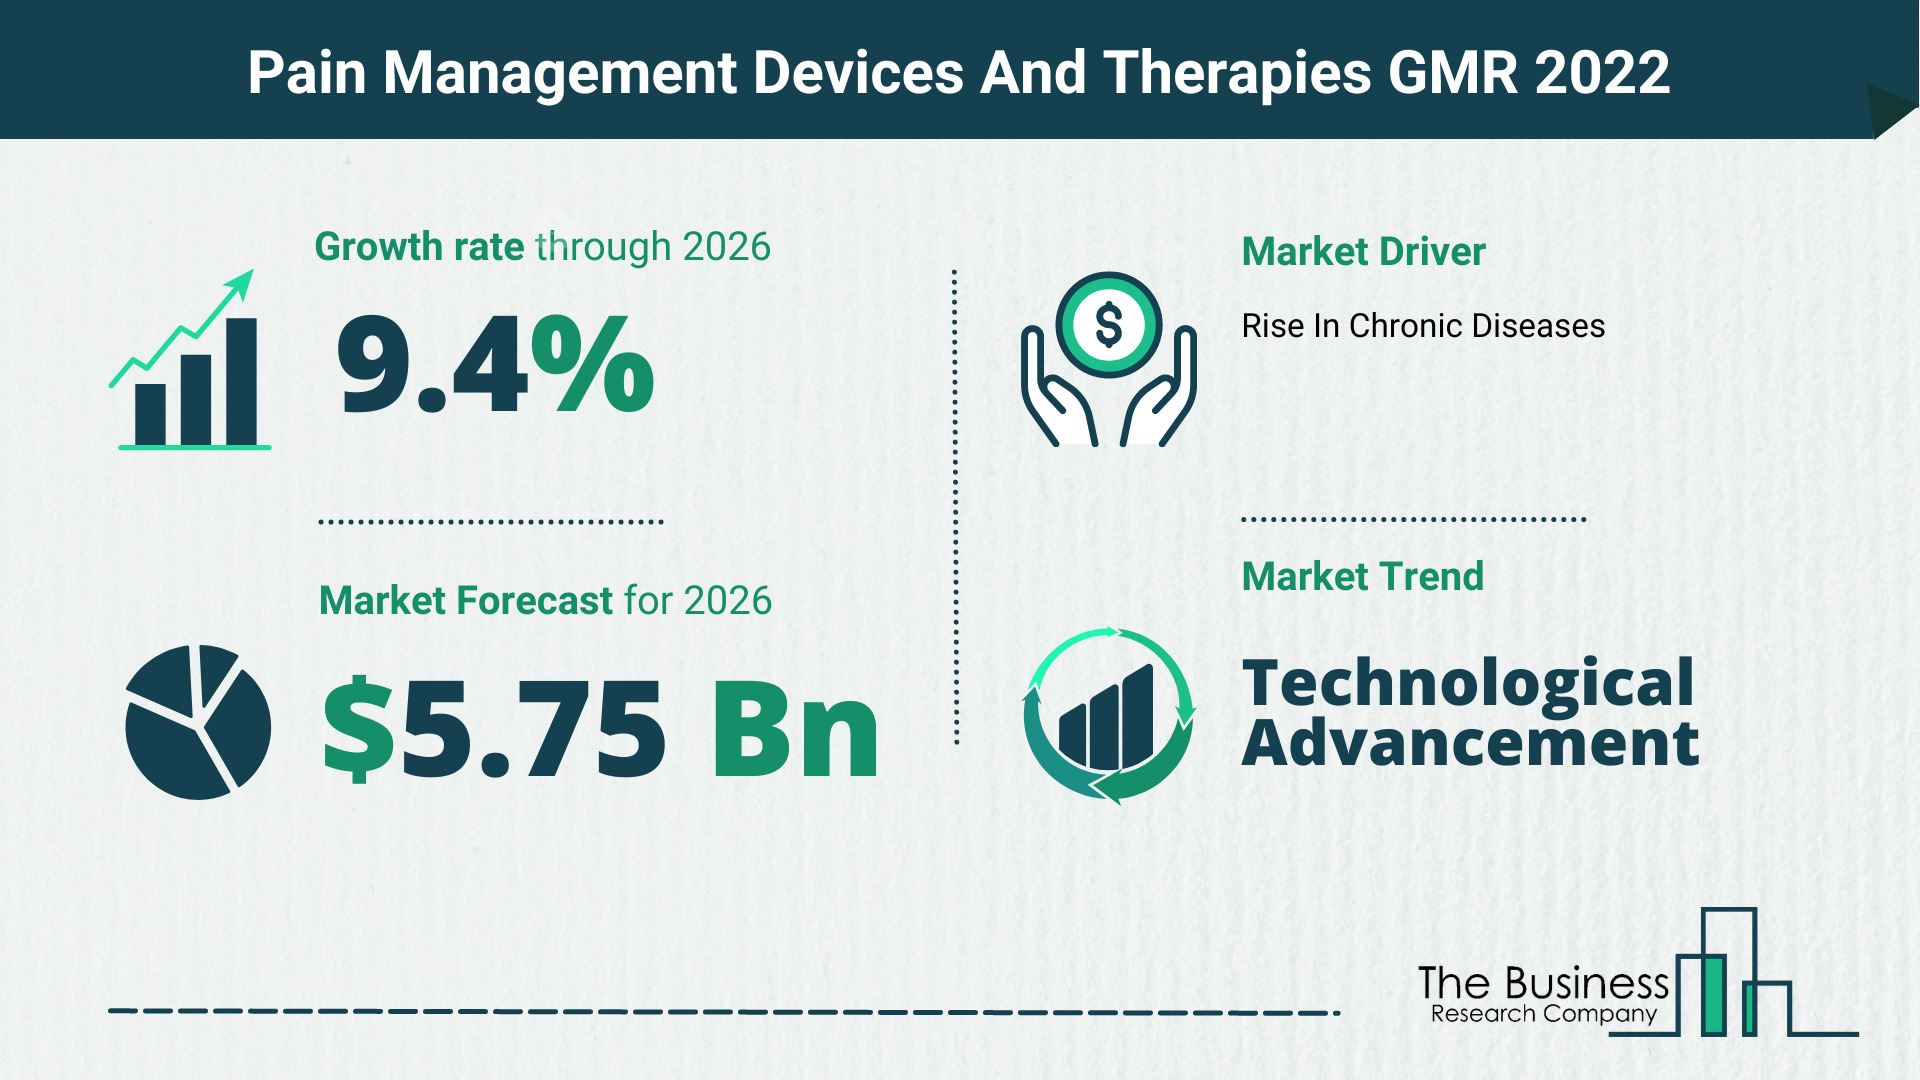 Latest Pain Management Devices And Therapies Market Growth Study 2022-2026 By The Business Research Company